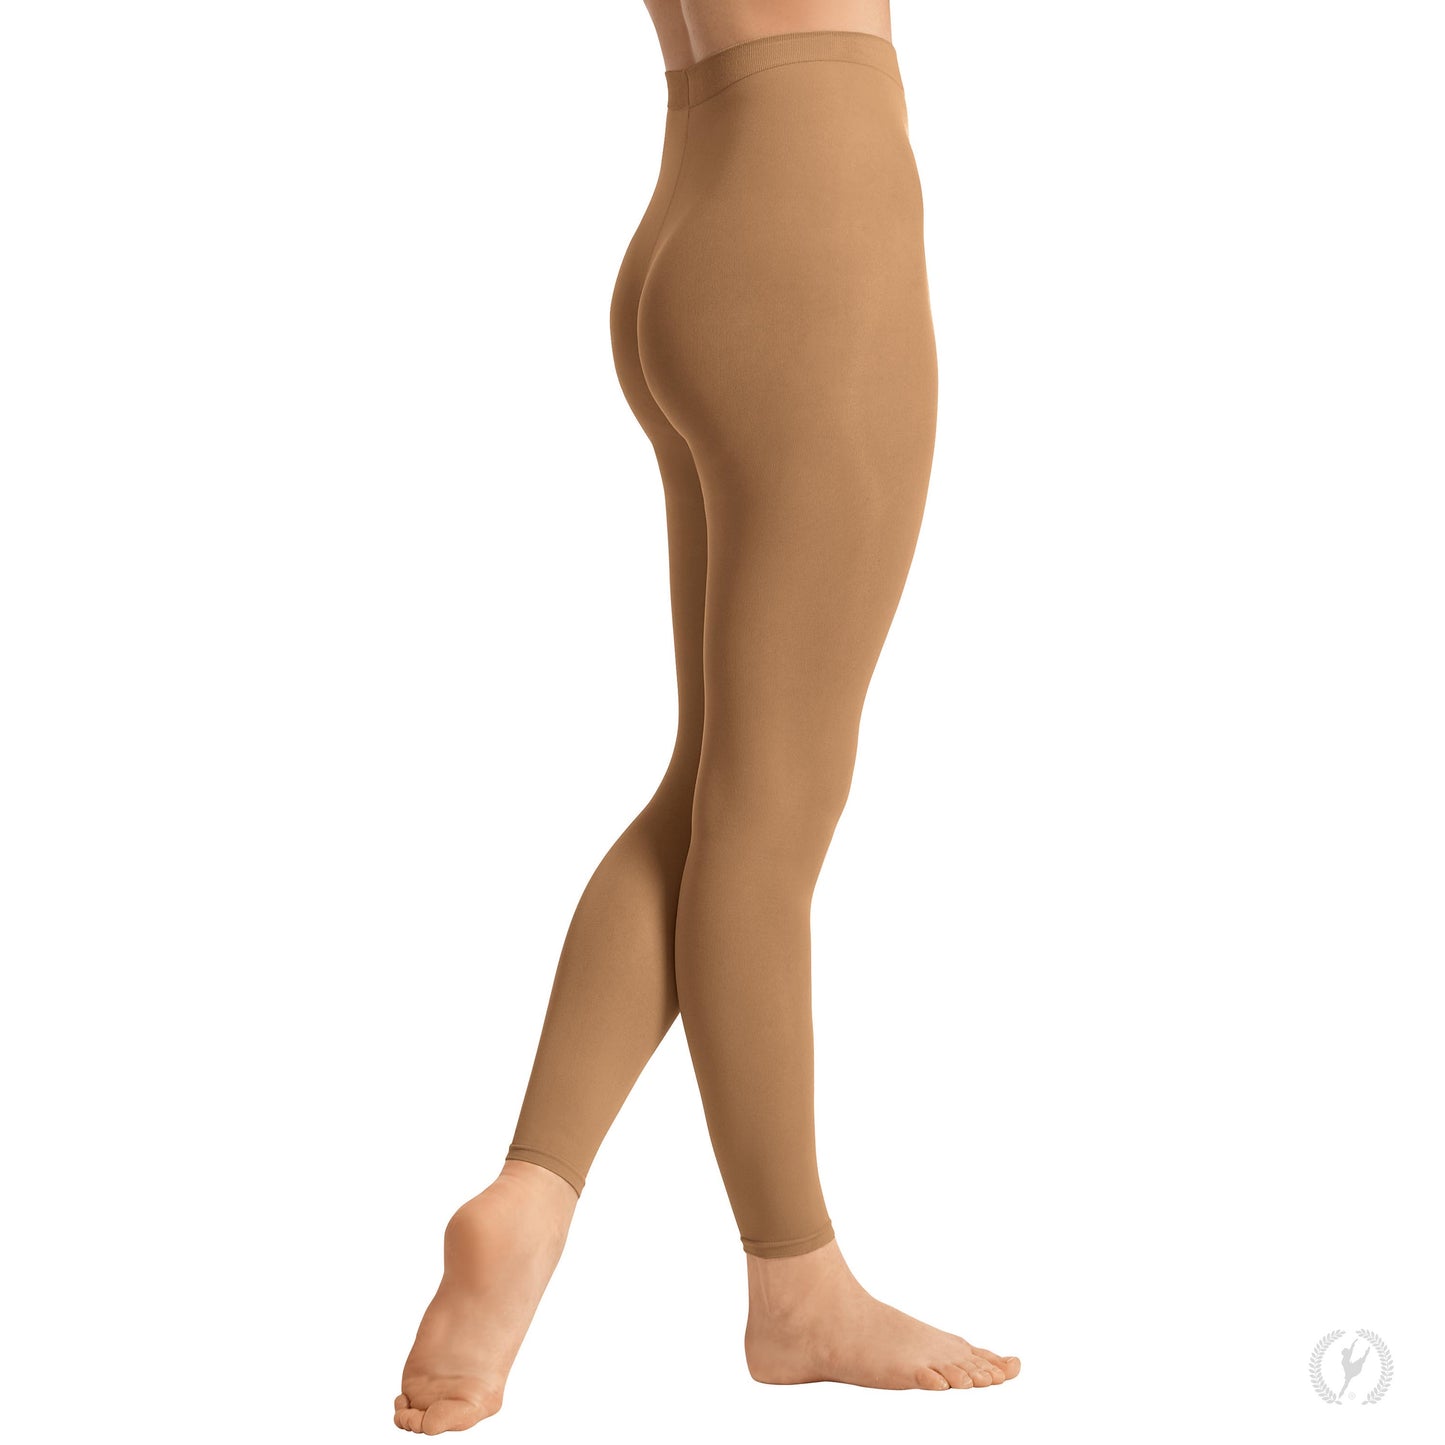 Eurotard Adult & Plus Size Footless Dance Tights